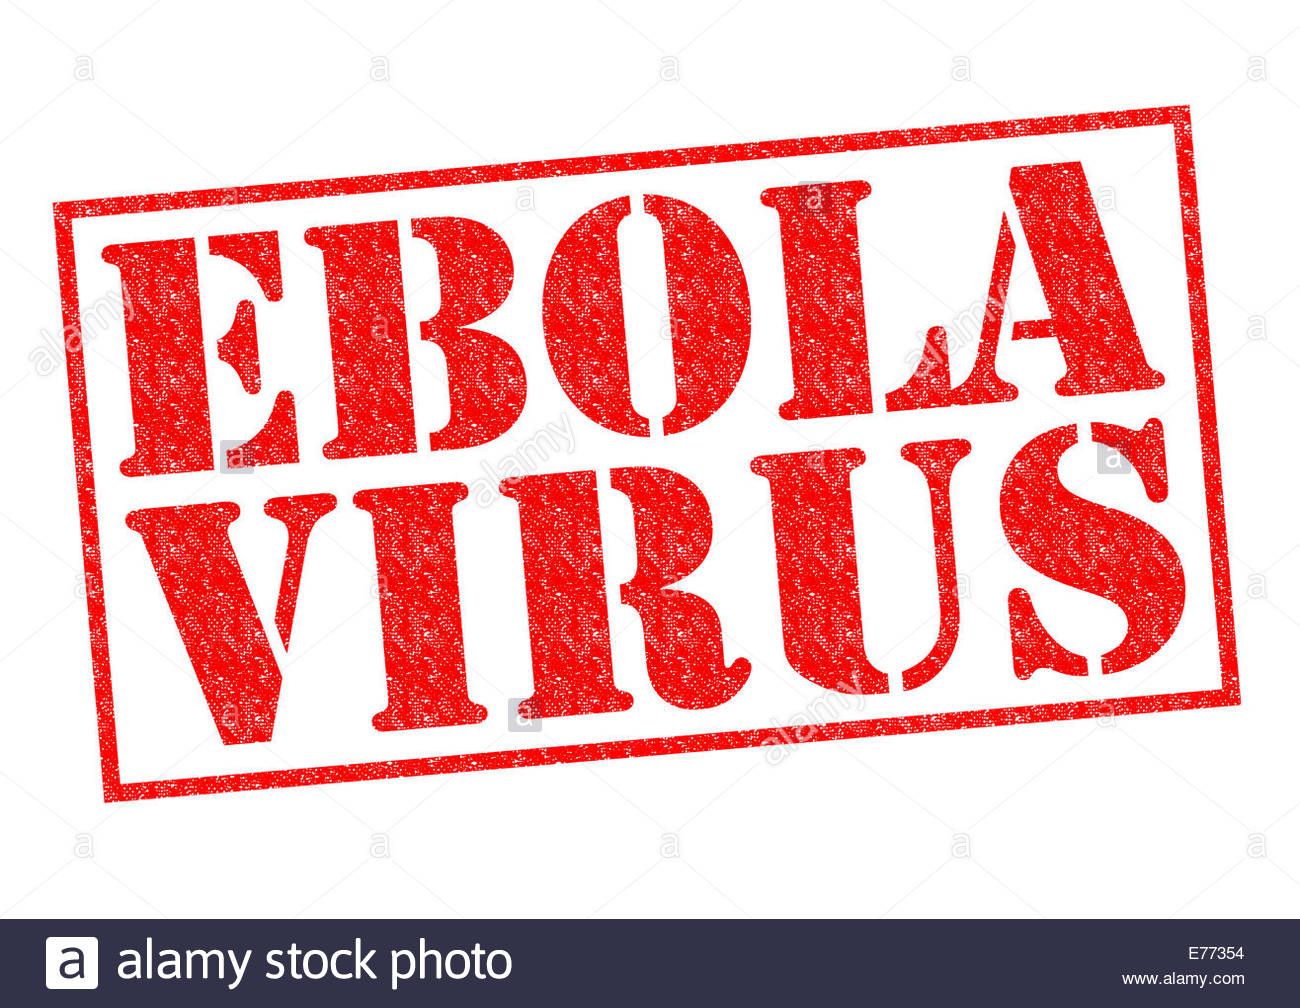 Ebola Virus Red Rubber Stamp Over A White Background Stock Photo